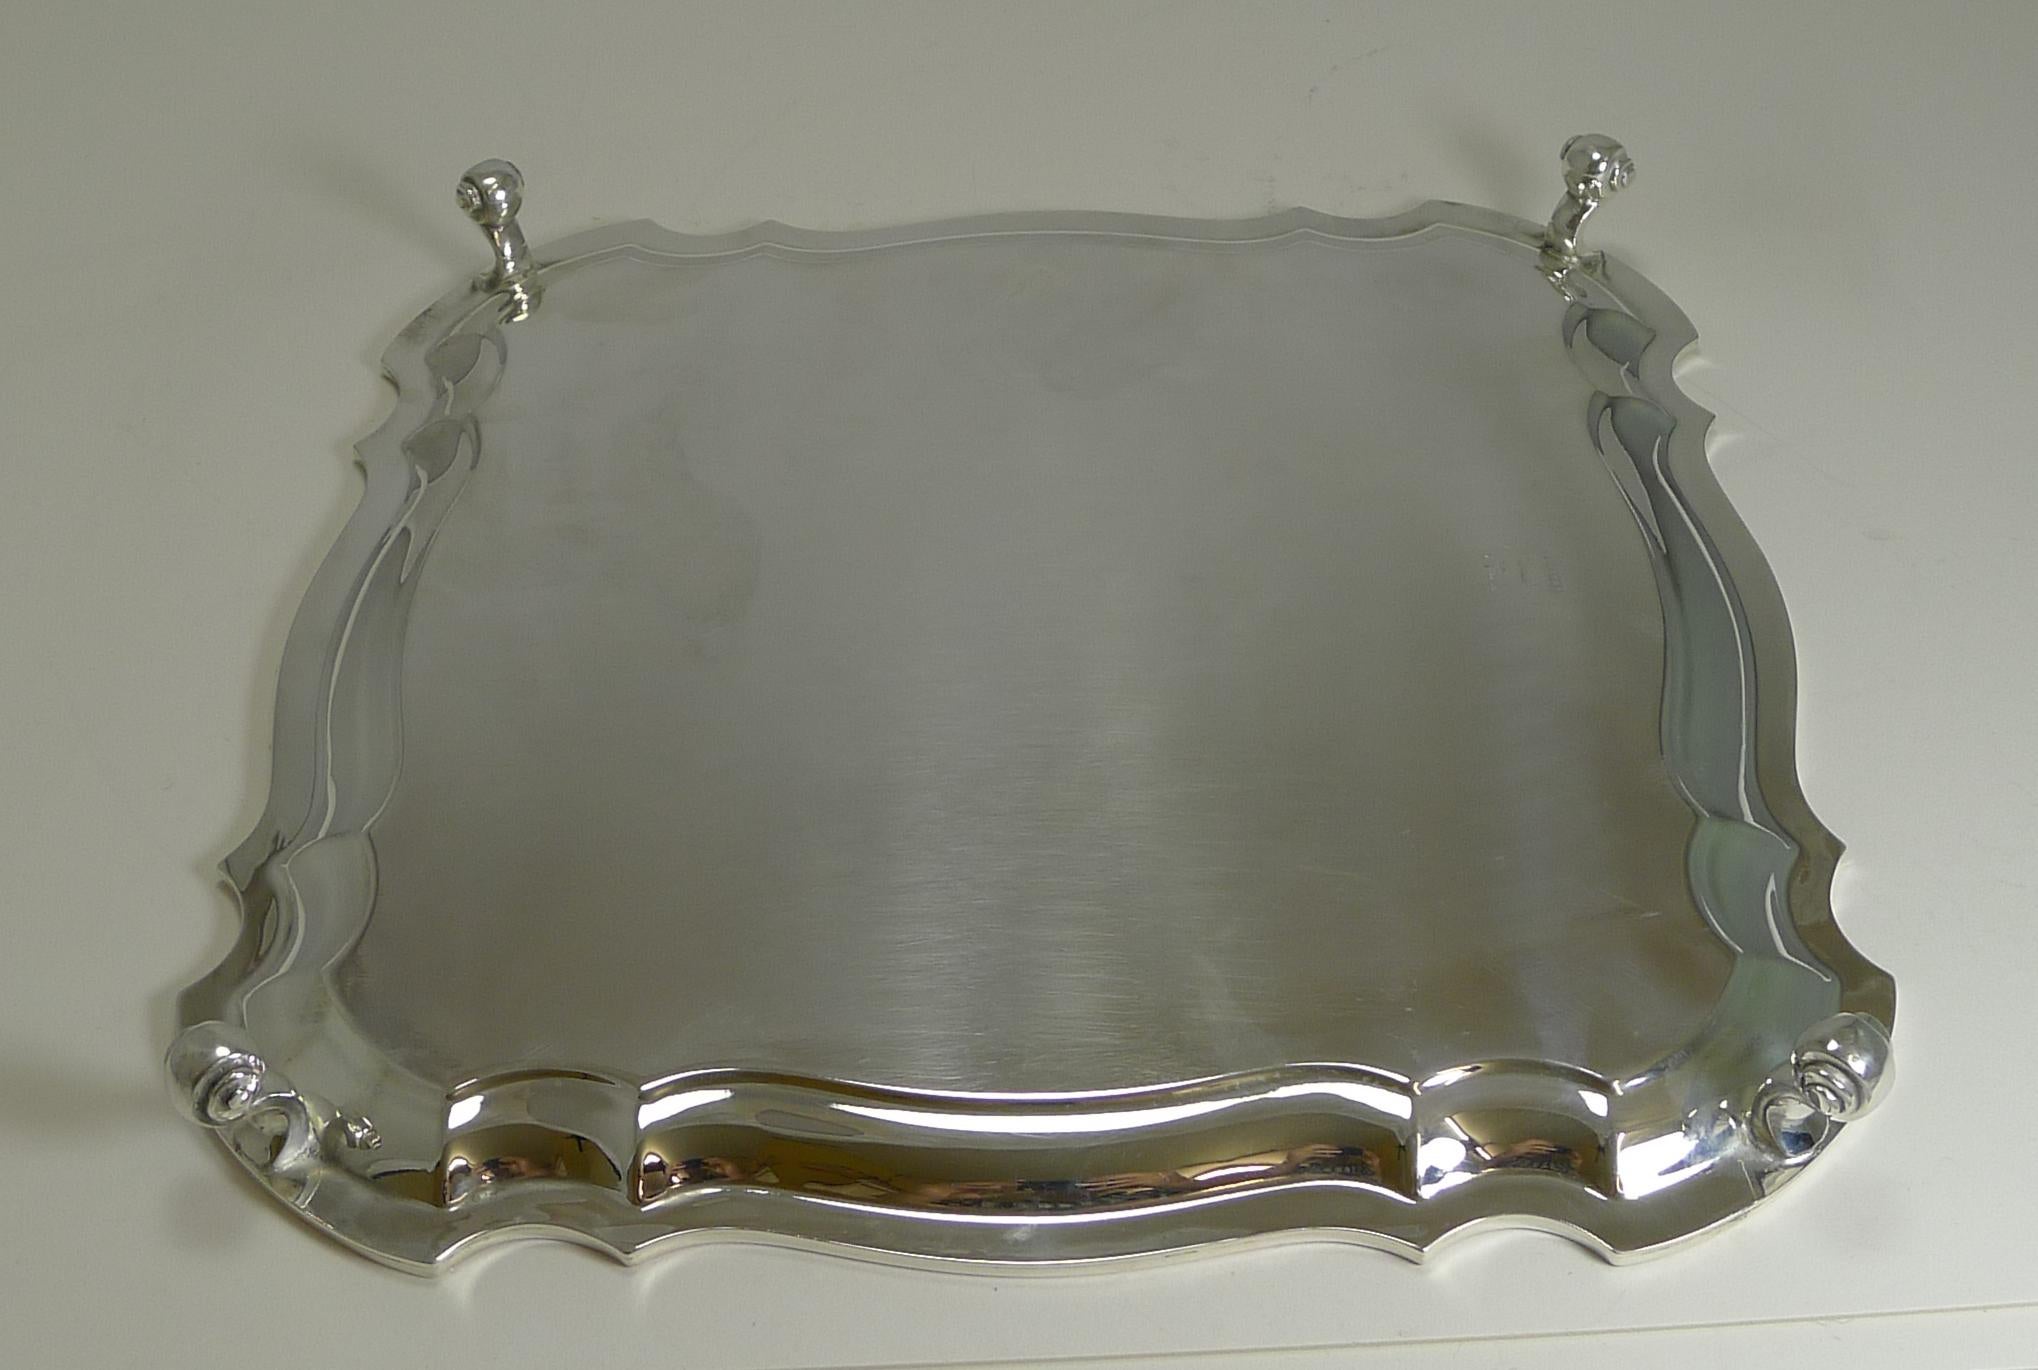 A fabulous square salver or tray with a wonderfully shaped border and standing on four attractive scrolled legs.

The underside is fully marked for C W Fletcher and Sons Ltd; it is also marked with the trade mark 